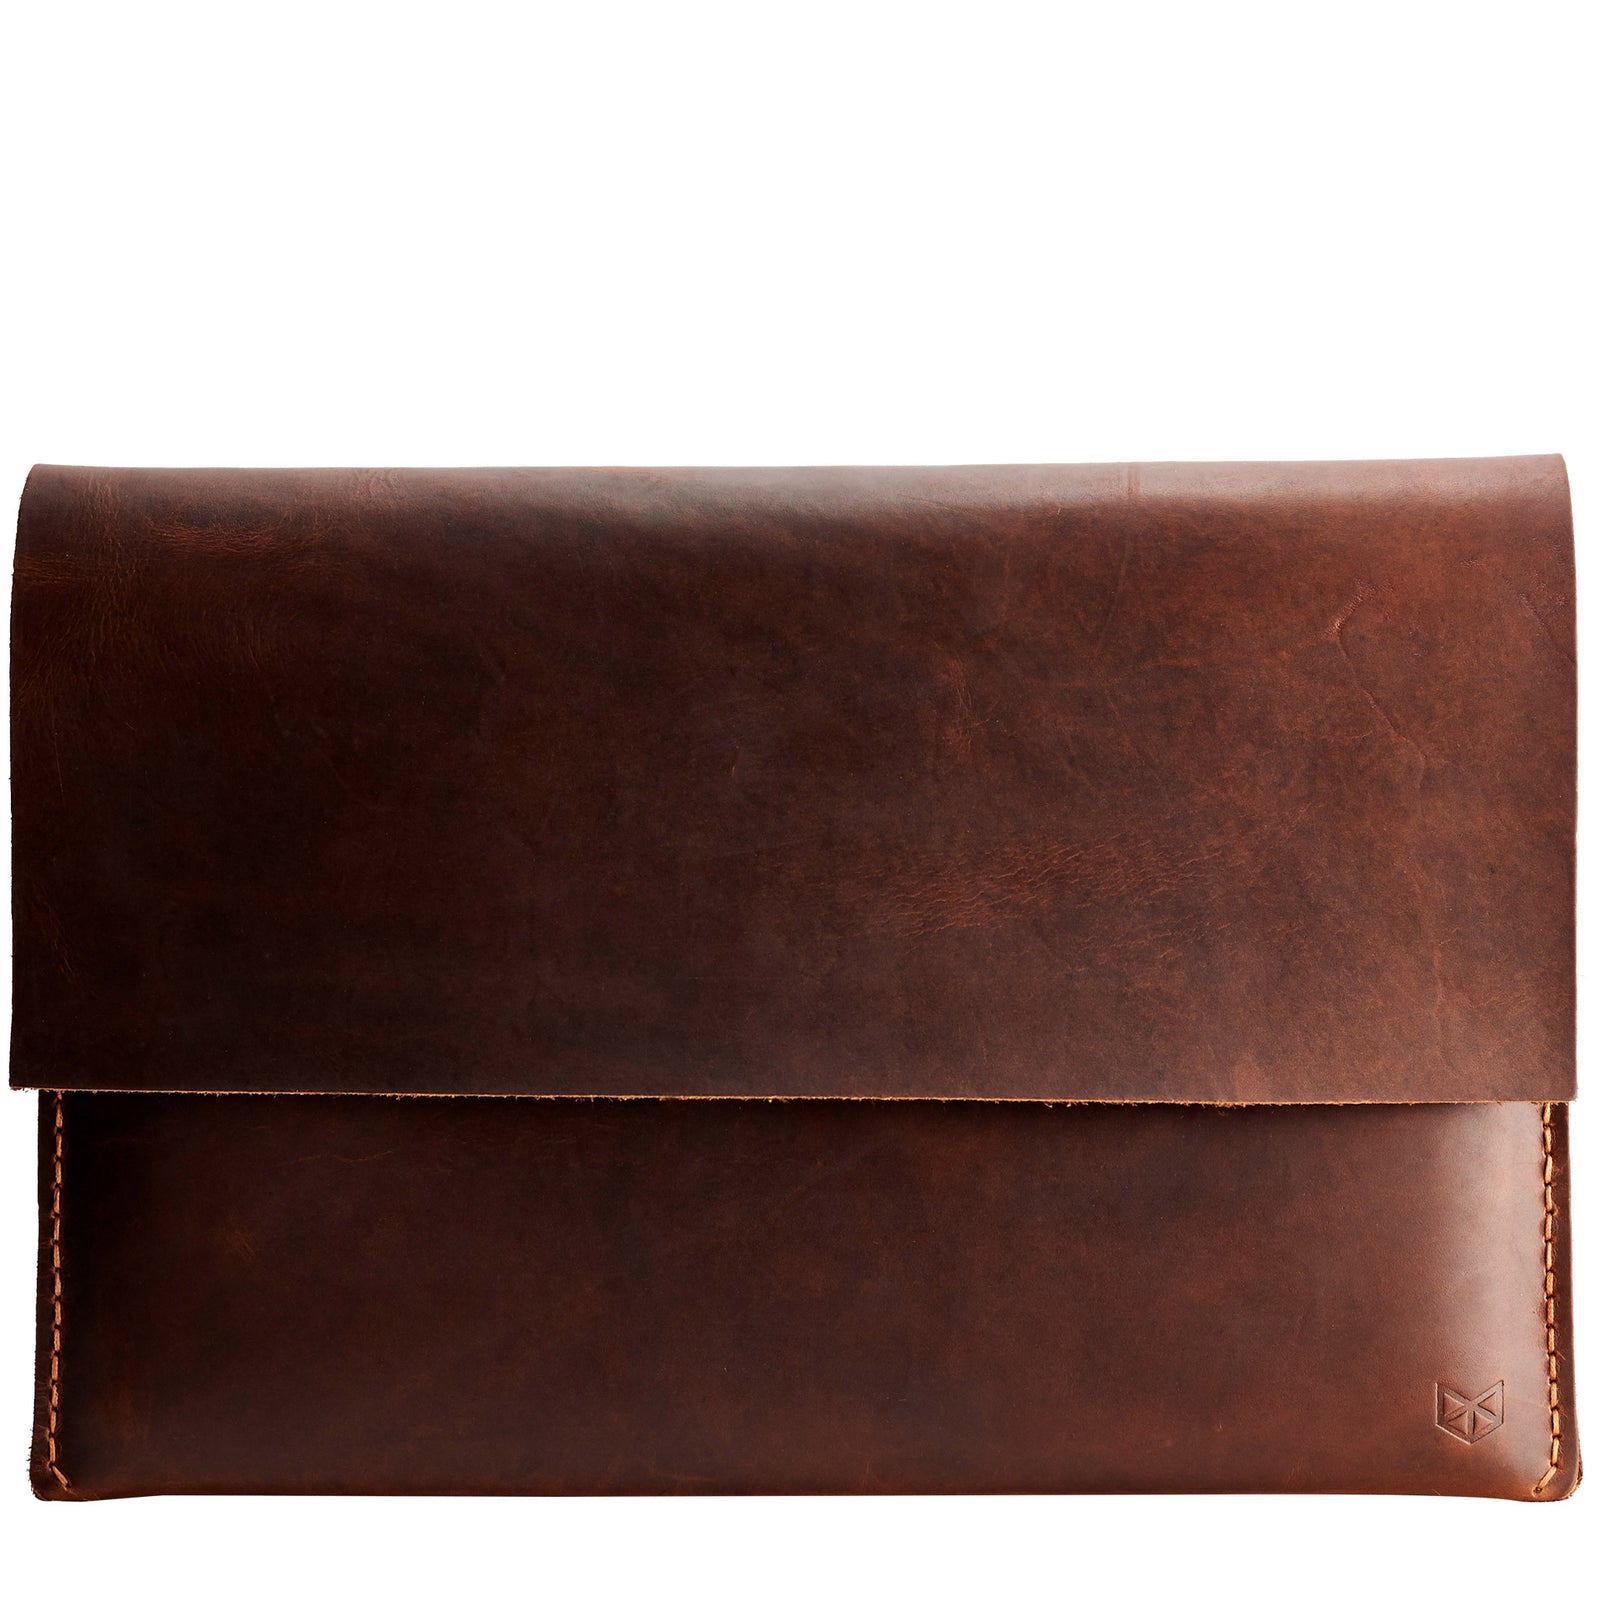 Closed. Distressed Tan Leather MacBook Case. MacBook Sleeve by Capra Leather